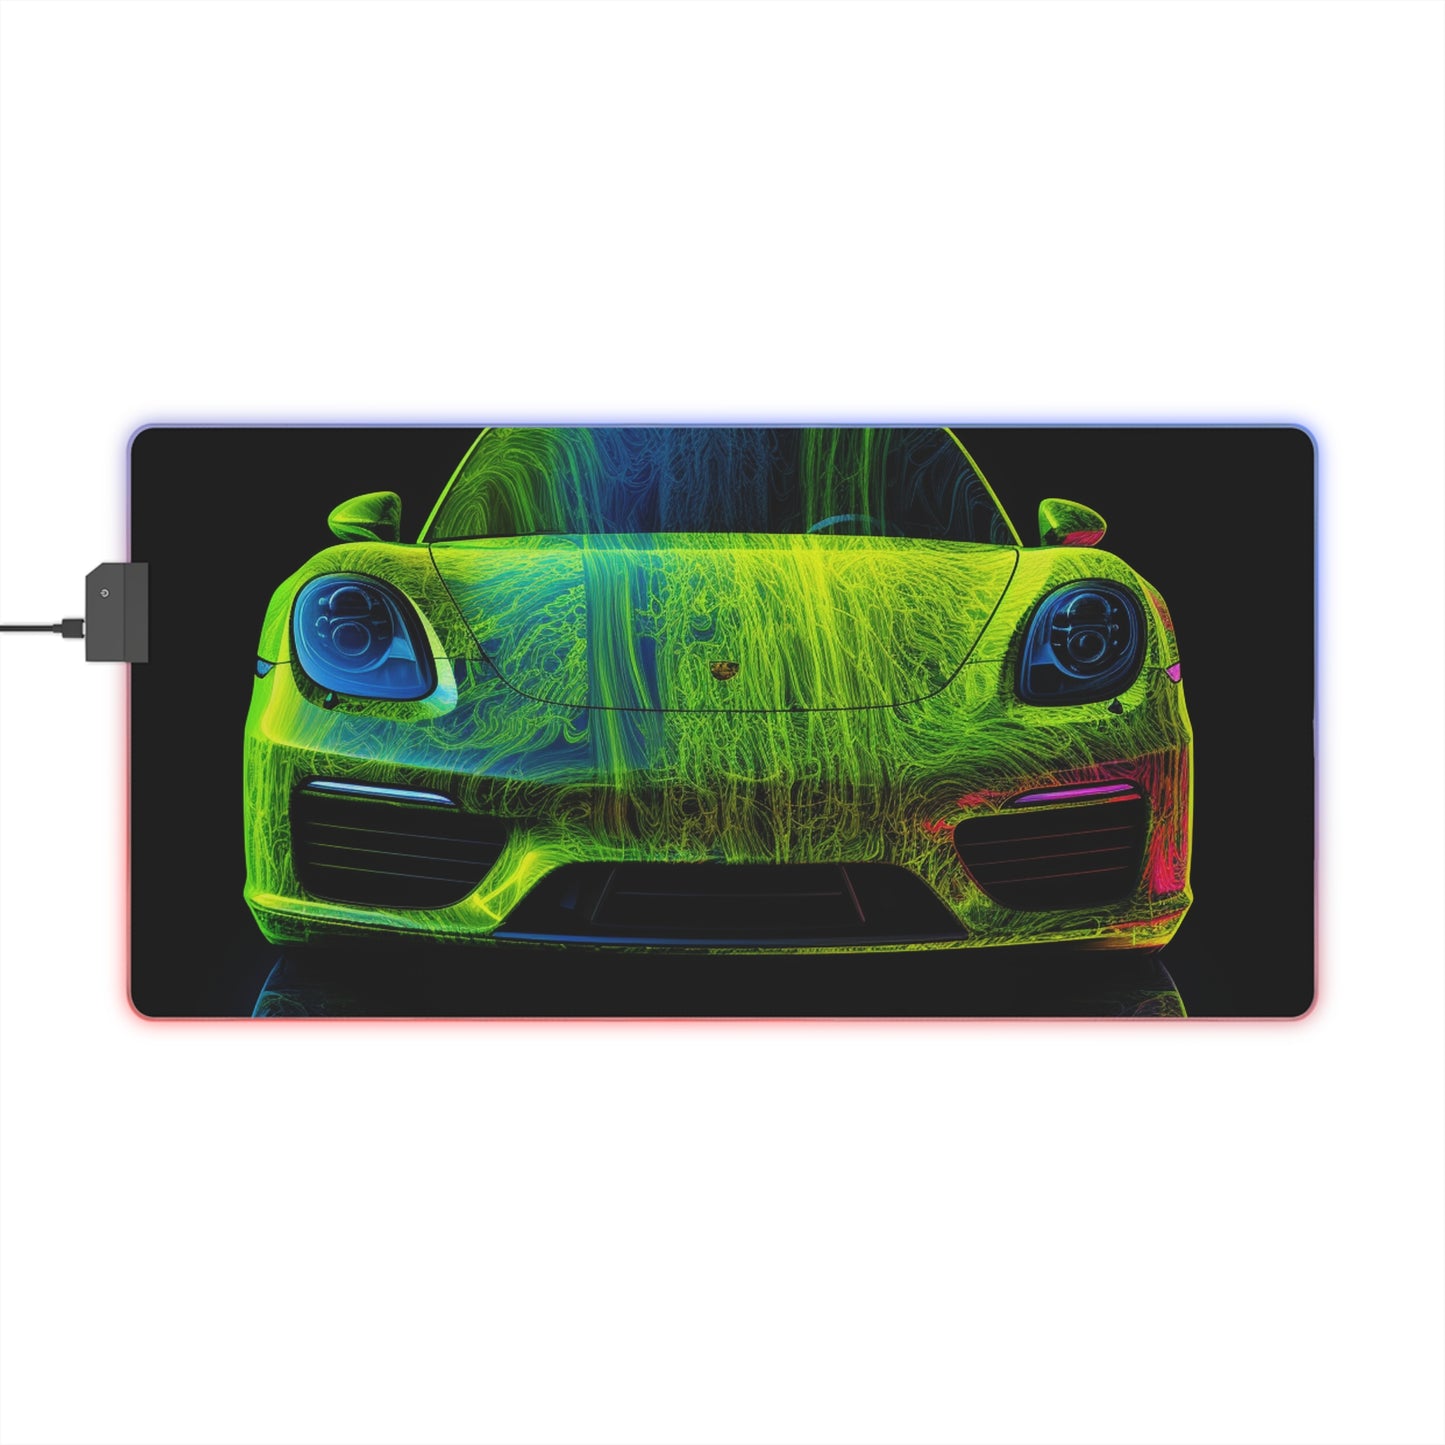 LED Gaming Mouse Pad Porsche Flair 3